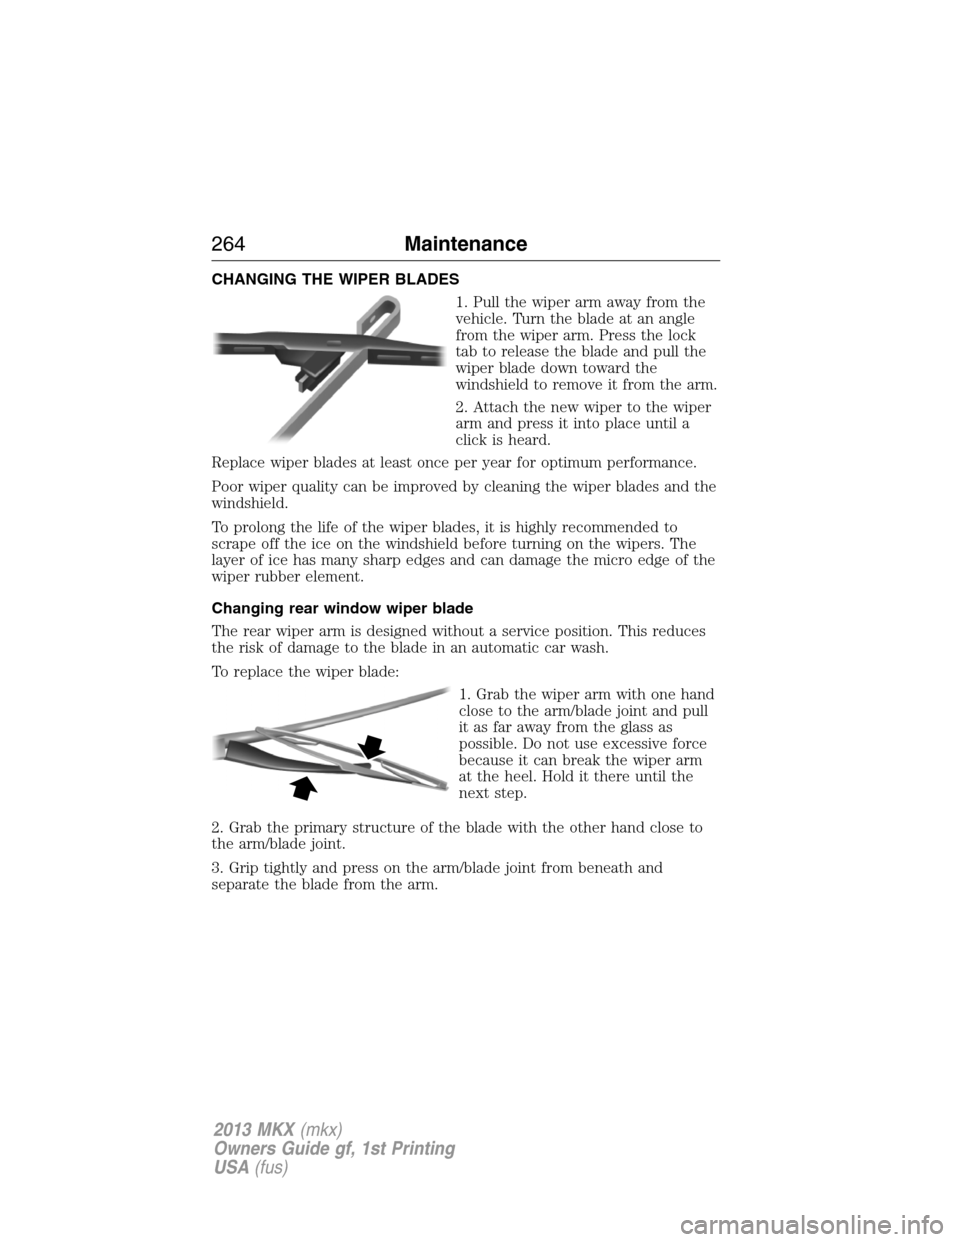 LINCOLN MKX 2013  Owners Manual CHANGING THE WIPER BLADES
1. Pull the wiper arm away from the
vehicle. Turn the blade at an angle
from the wiper arm. Press the lock
tab to release the blade and pull the
wiper blade down toward the
w